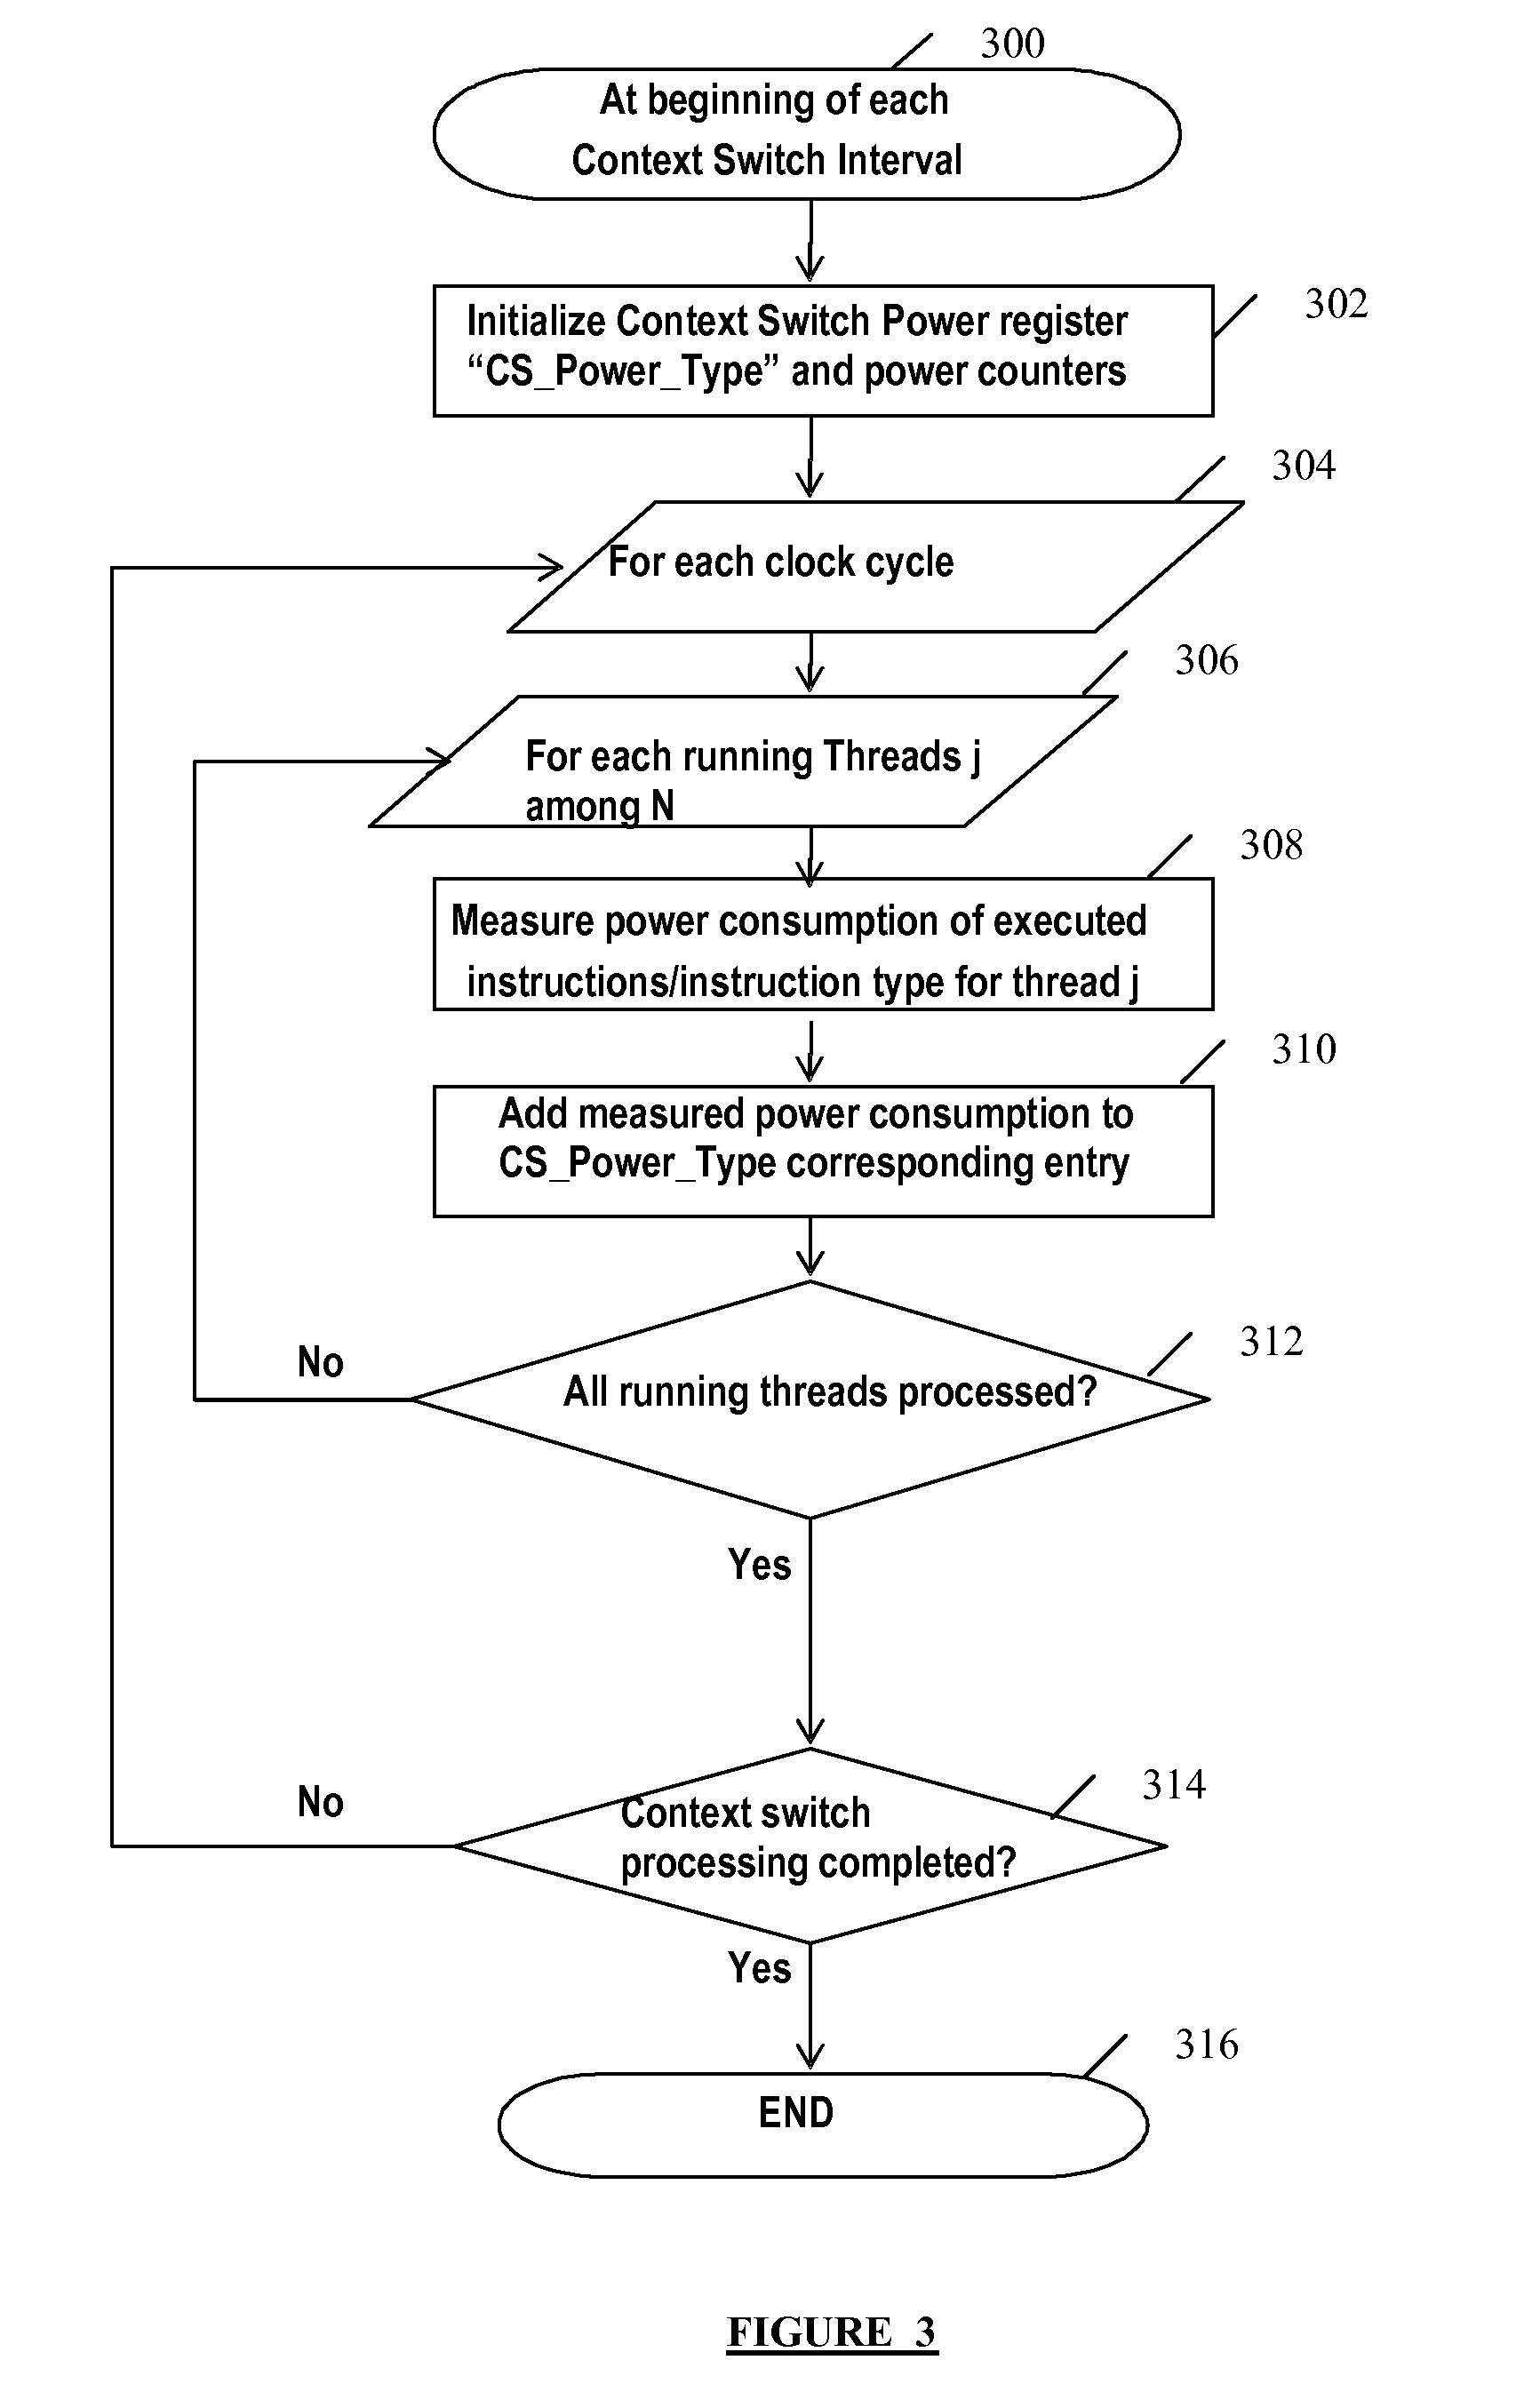 Scheduling threads in a processor based on instruction type power consumption